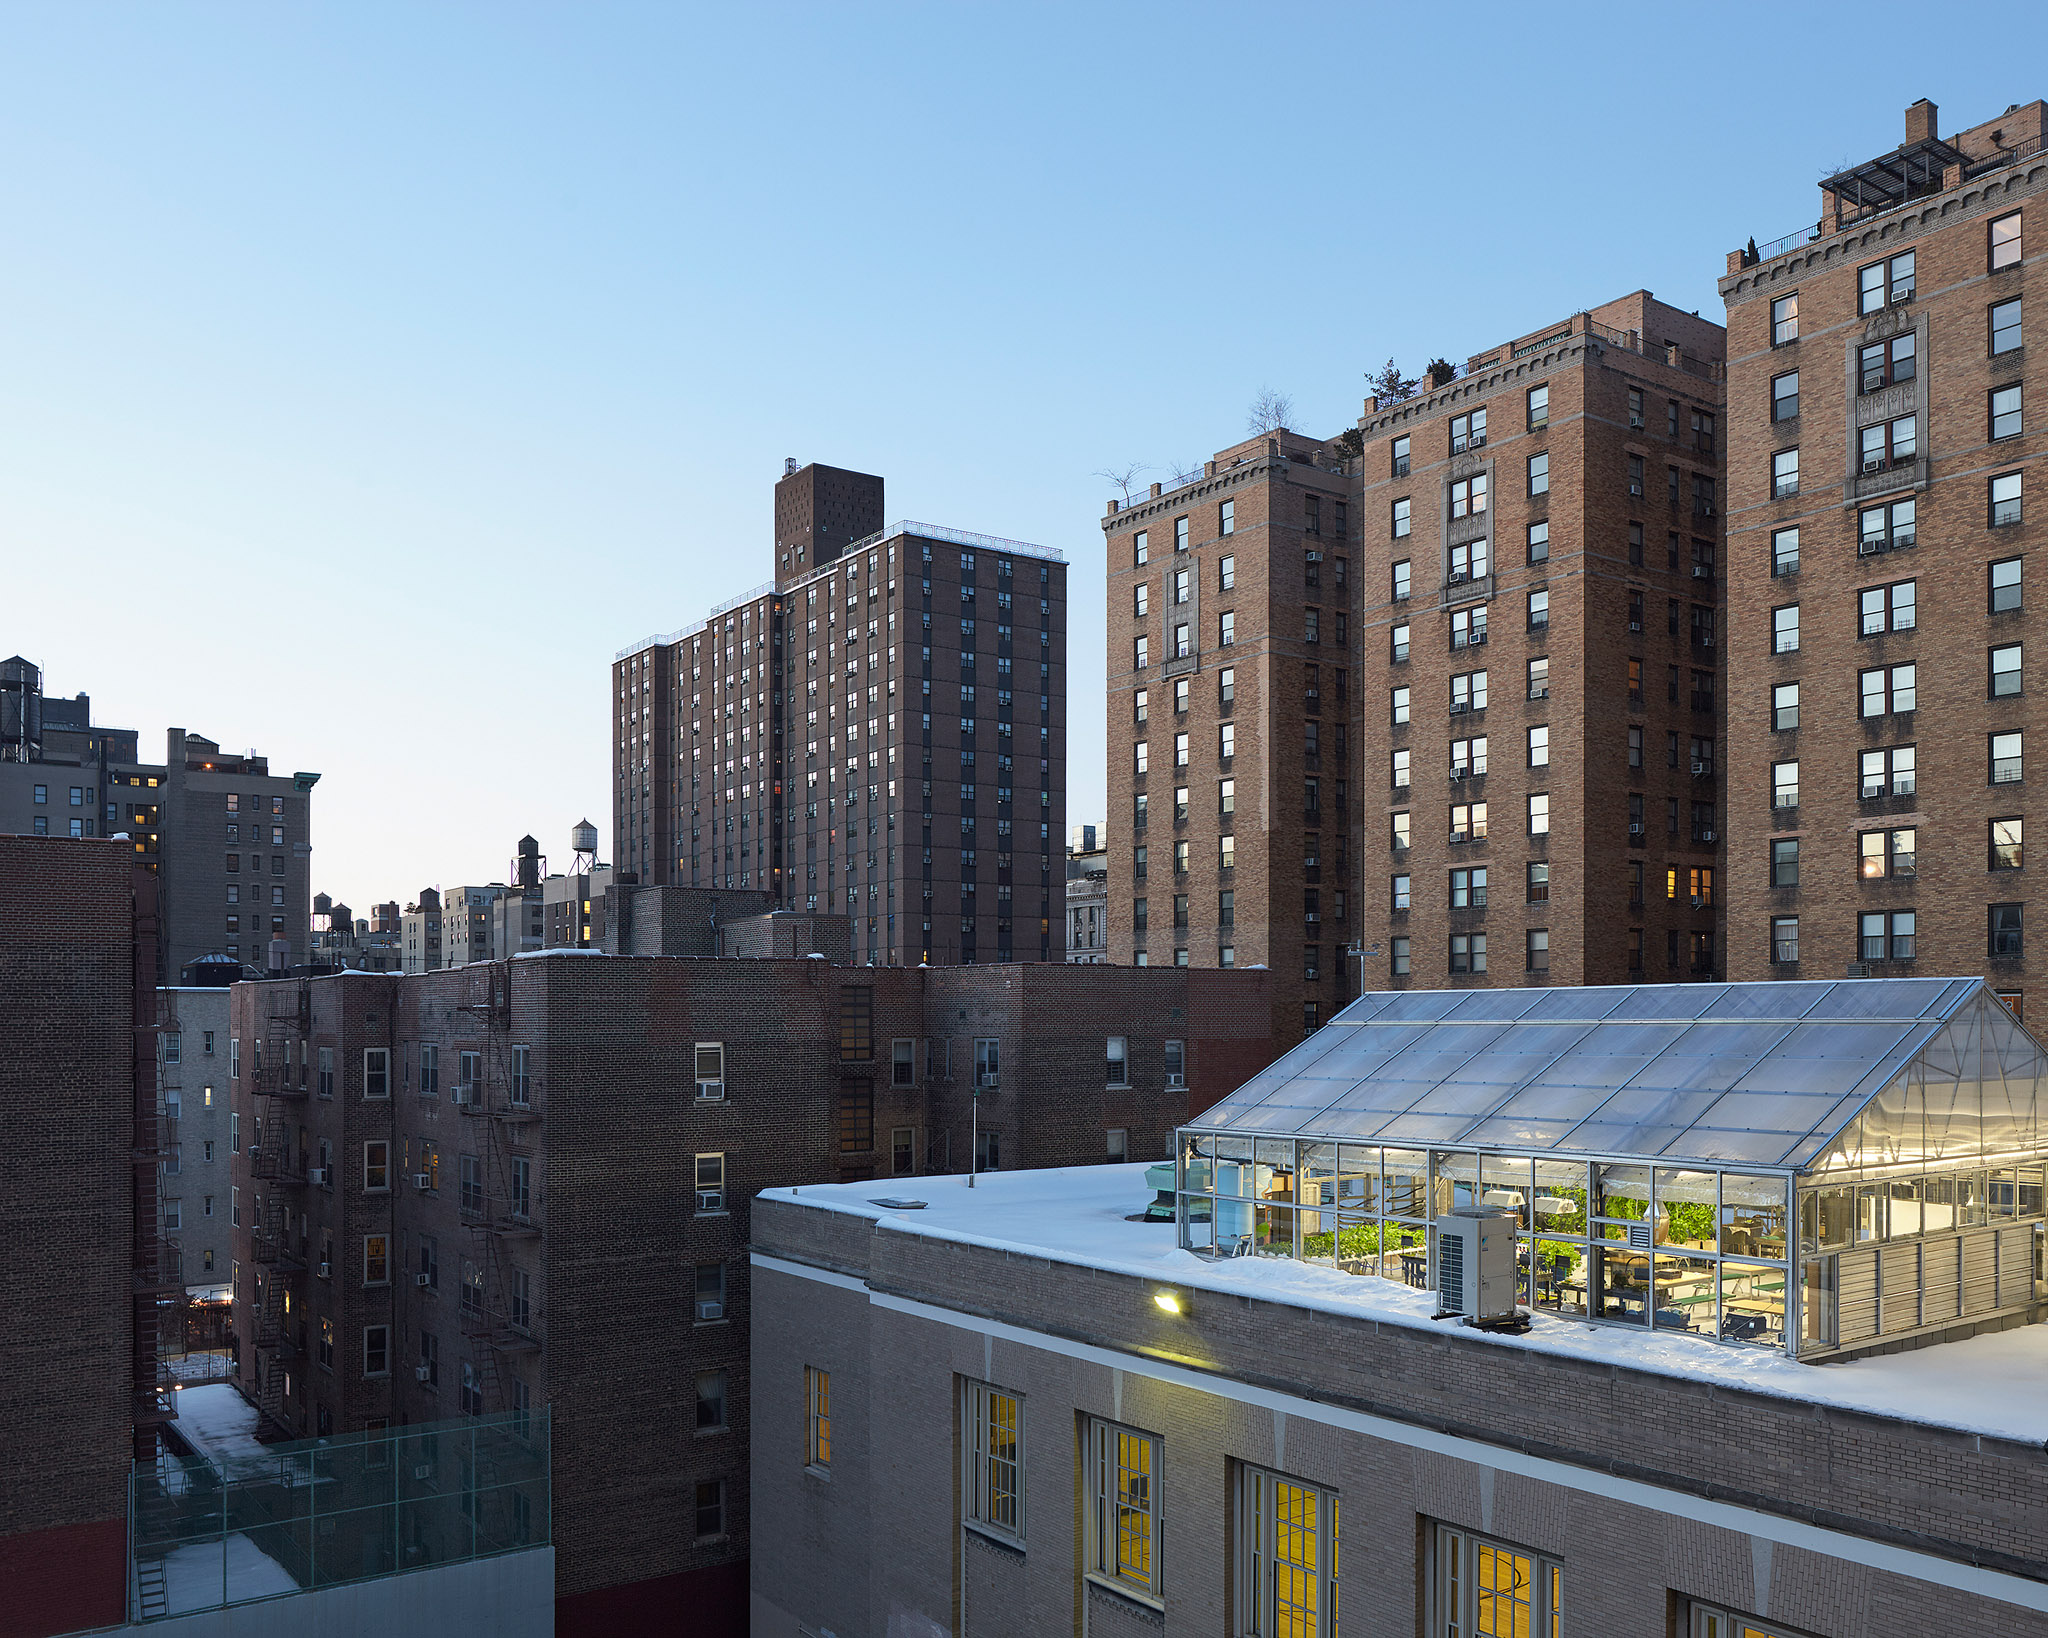 PS333 Green Roof, Location: New York City